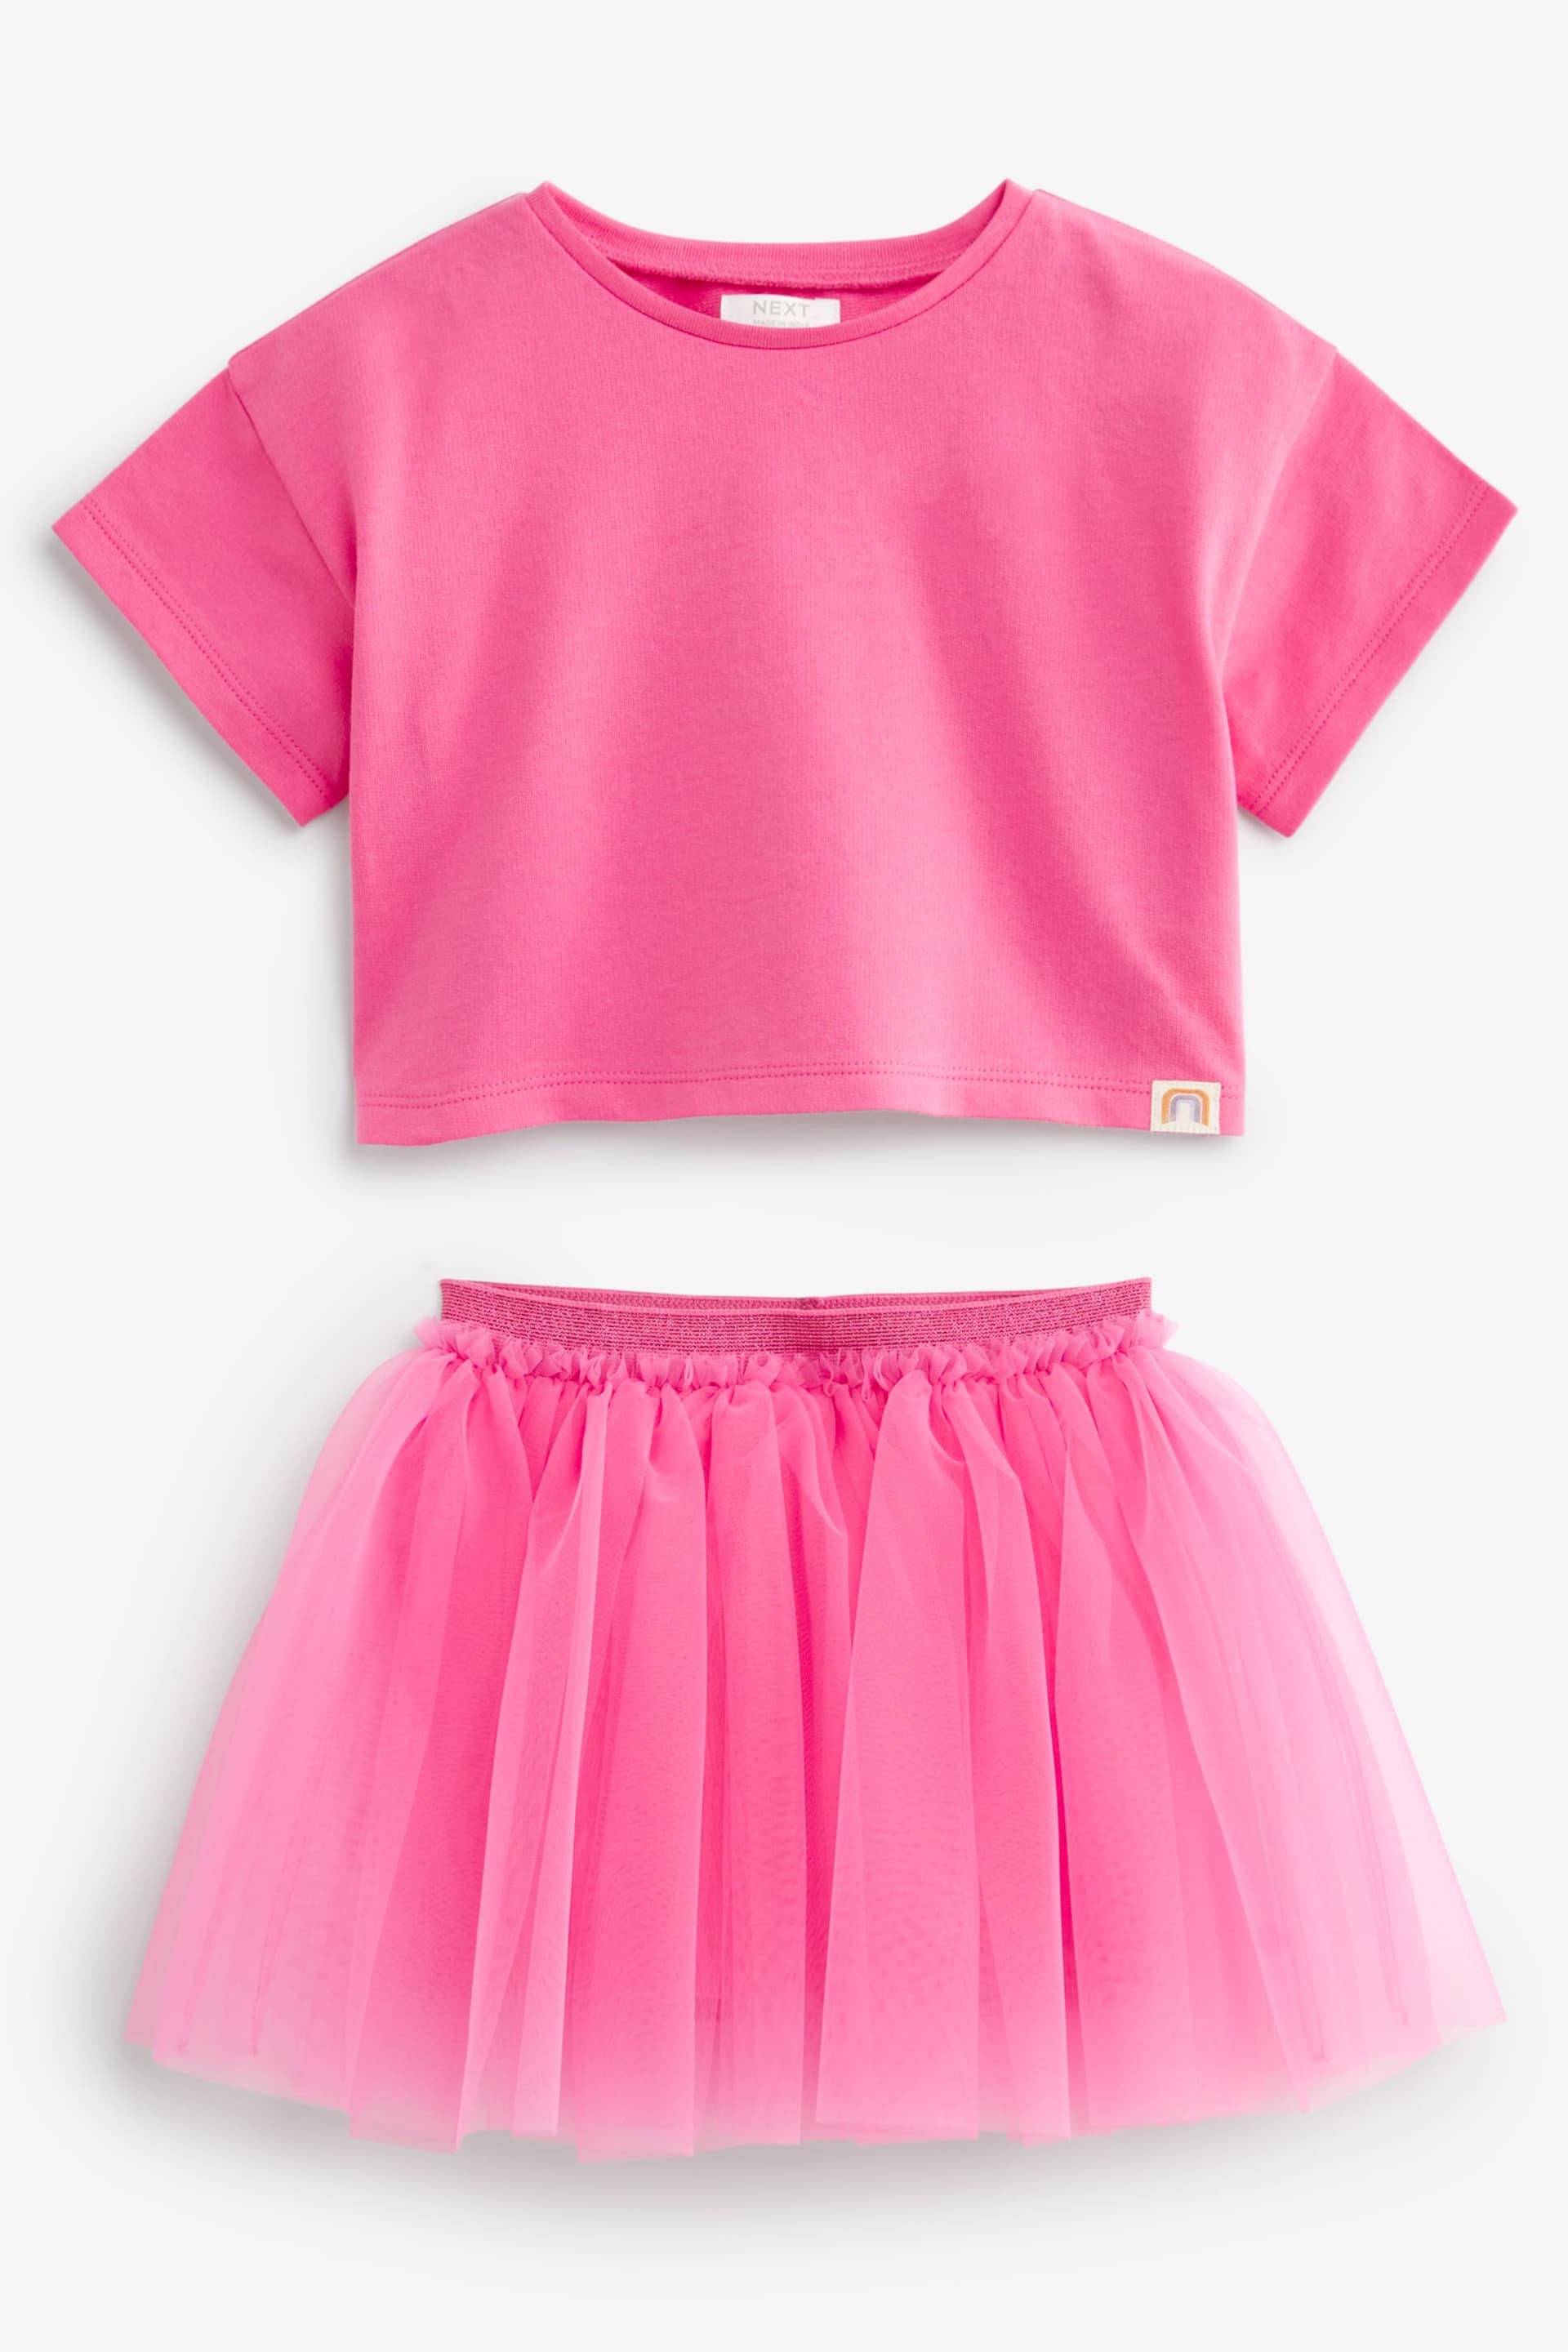 Bright Pink T-Shirt and Skirt Set (3mths-7yrs) - Image 5 of 7